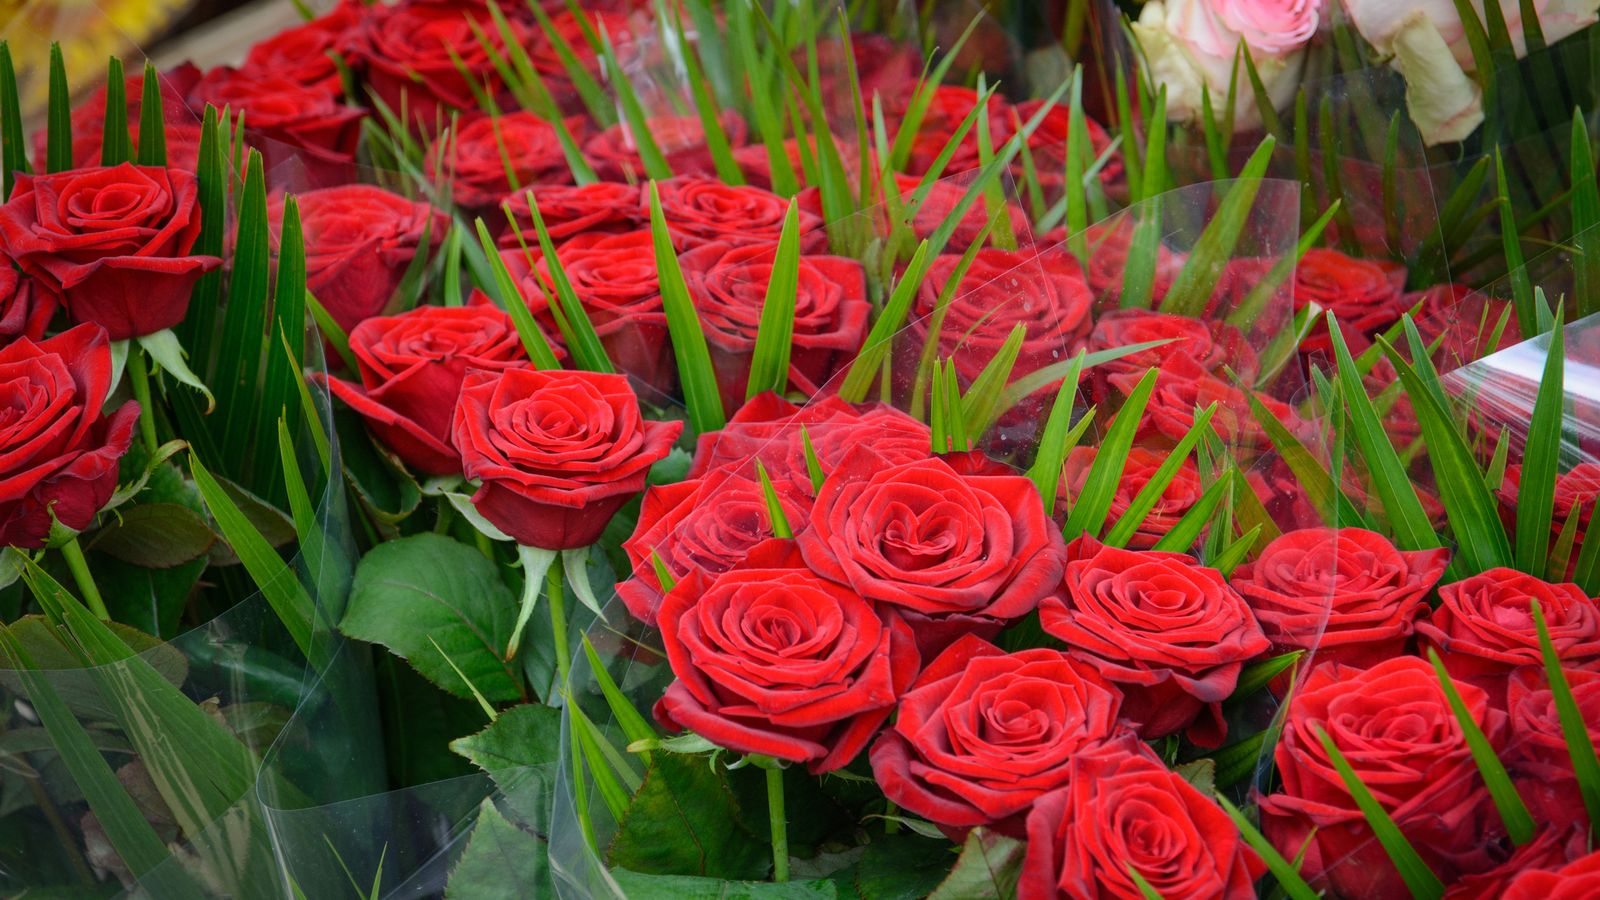 Roses are red, violets are blue, fears of shortages on Valentine's Day, over Brexit checks with the EU